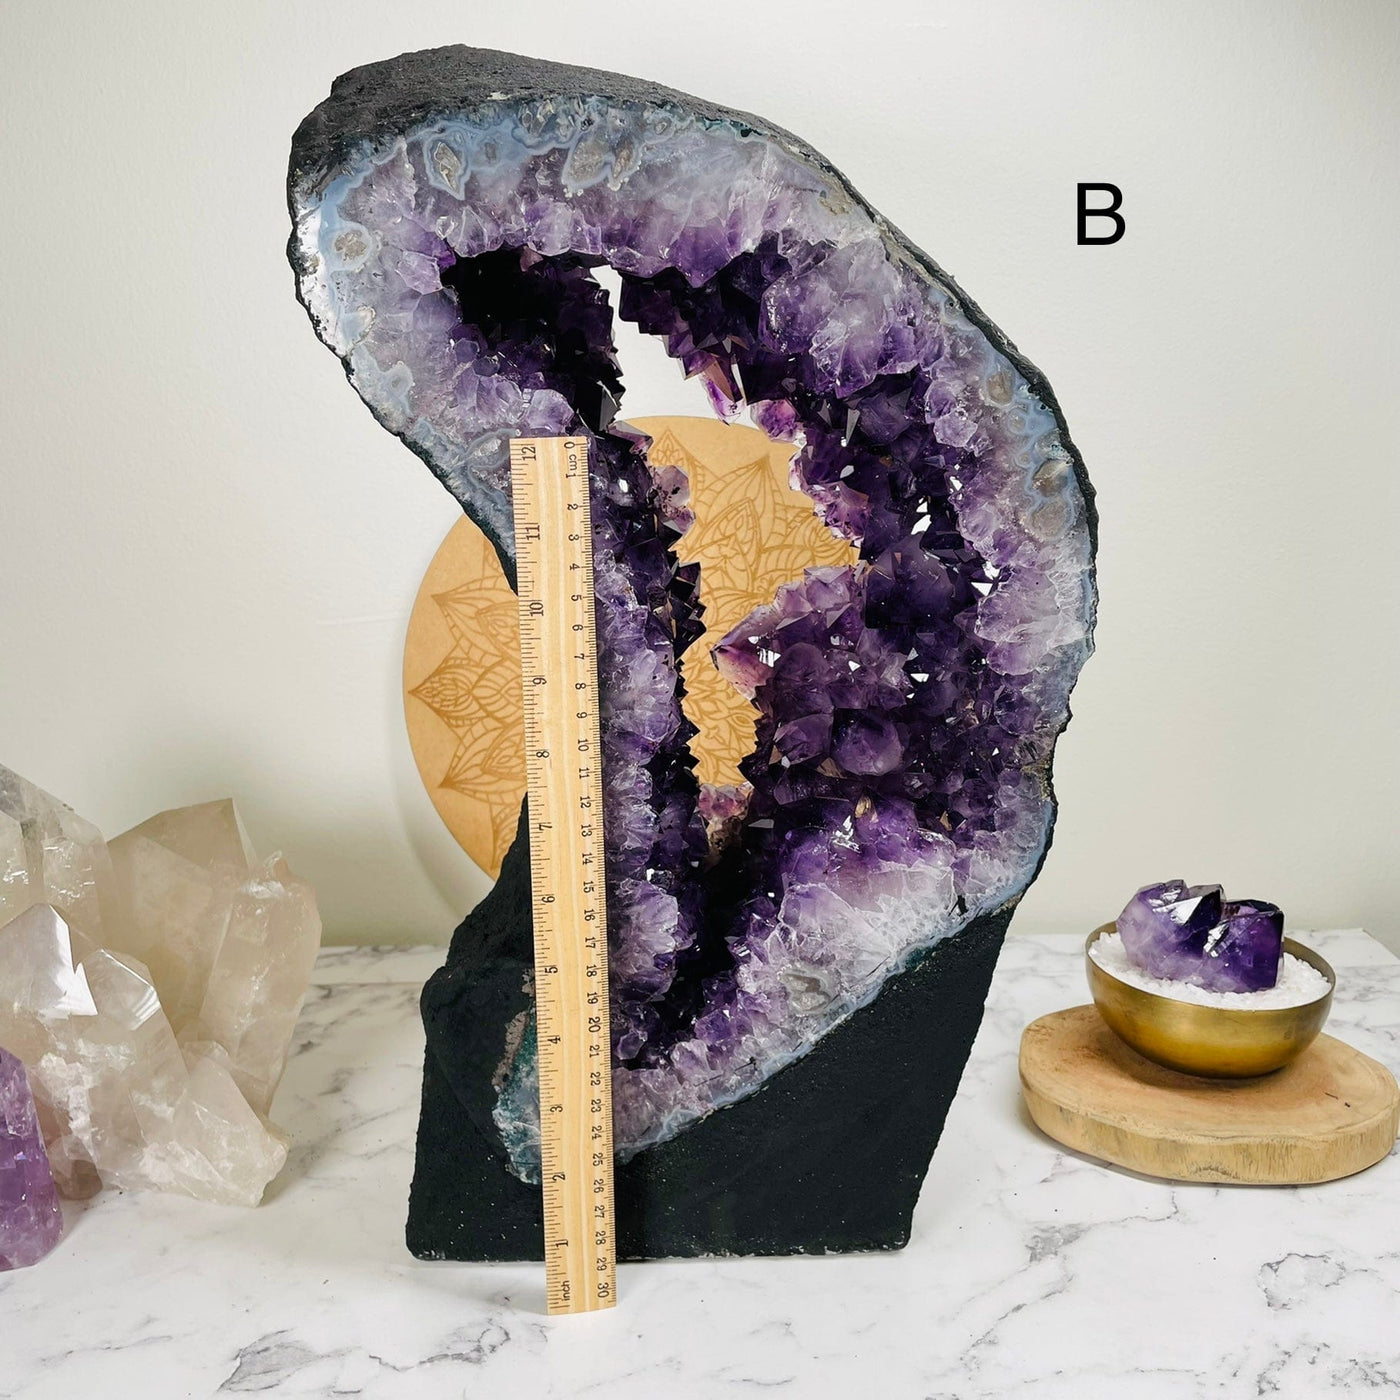 option B amethyst portal displayed next to a ruler for size reference 